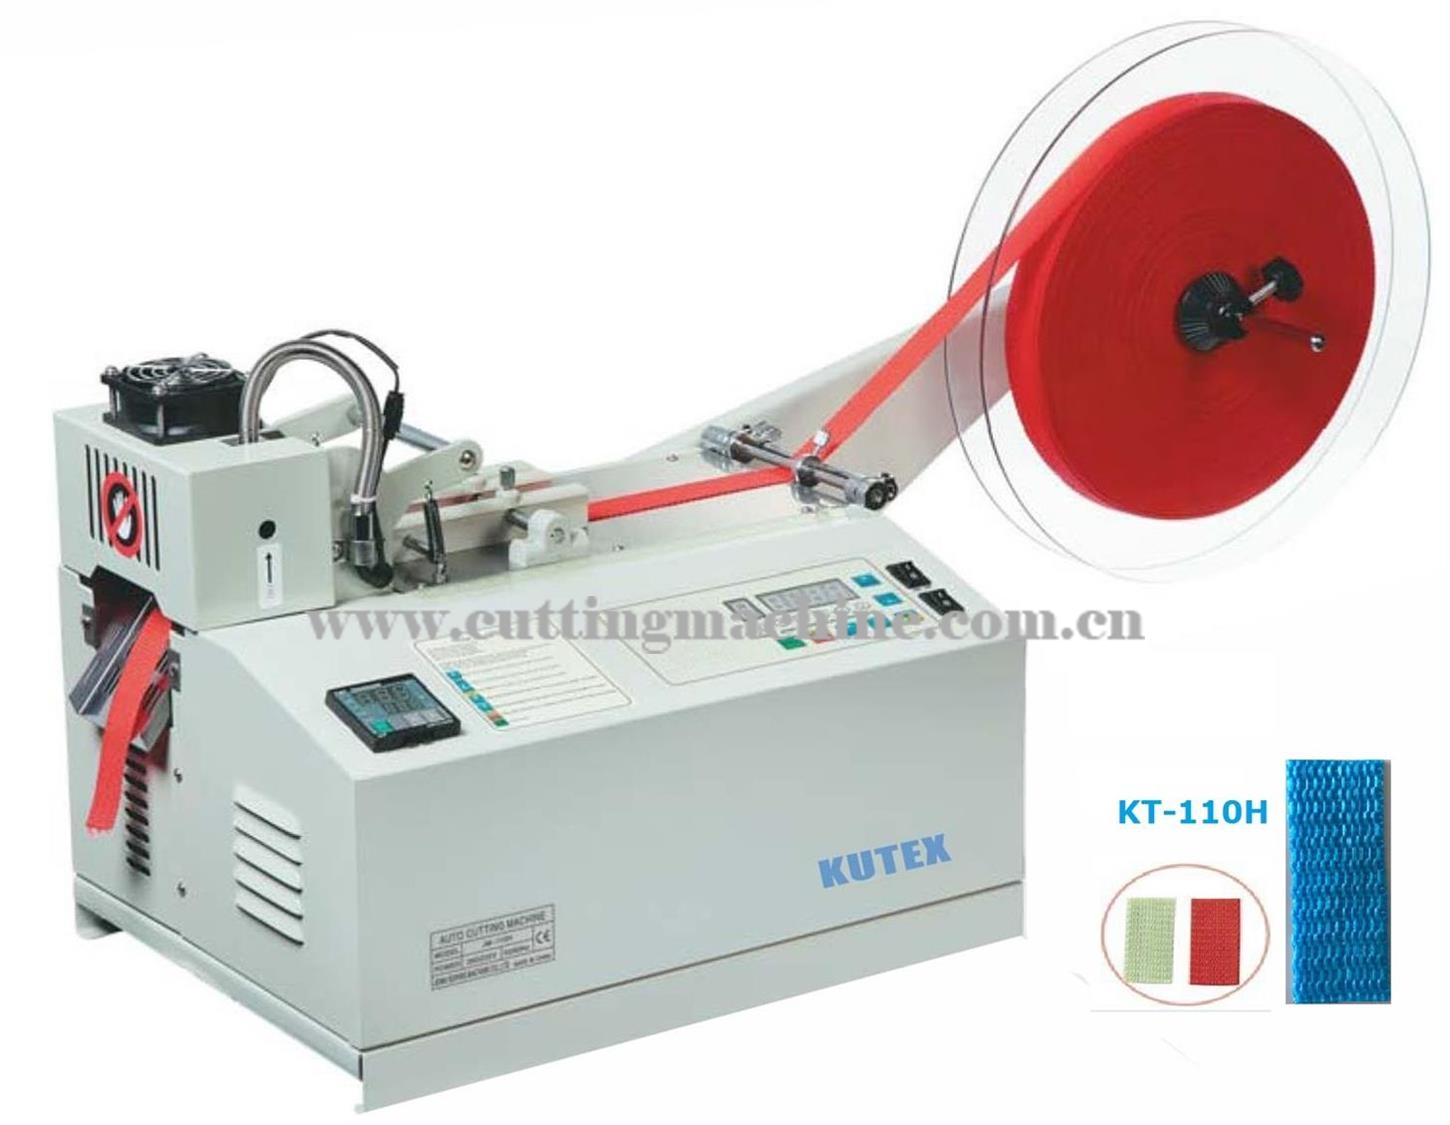 Tape Cutting Machine with Hot Knife